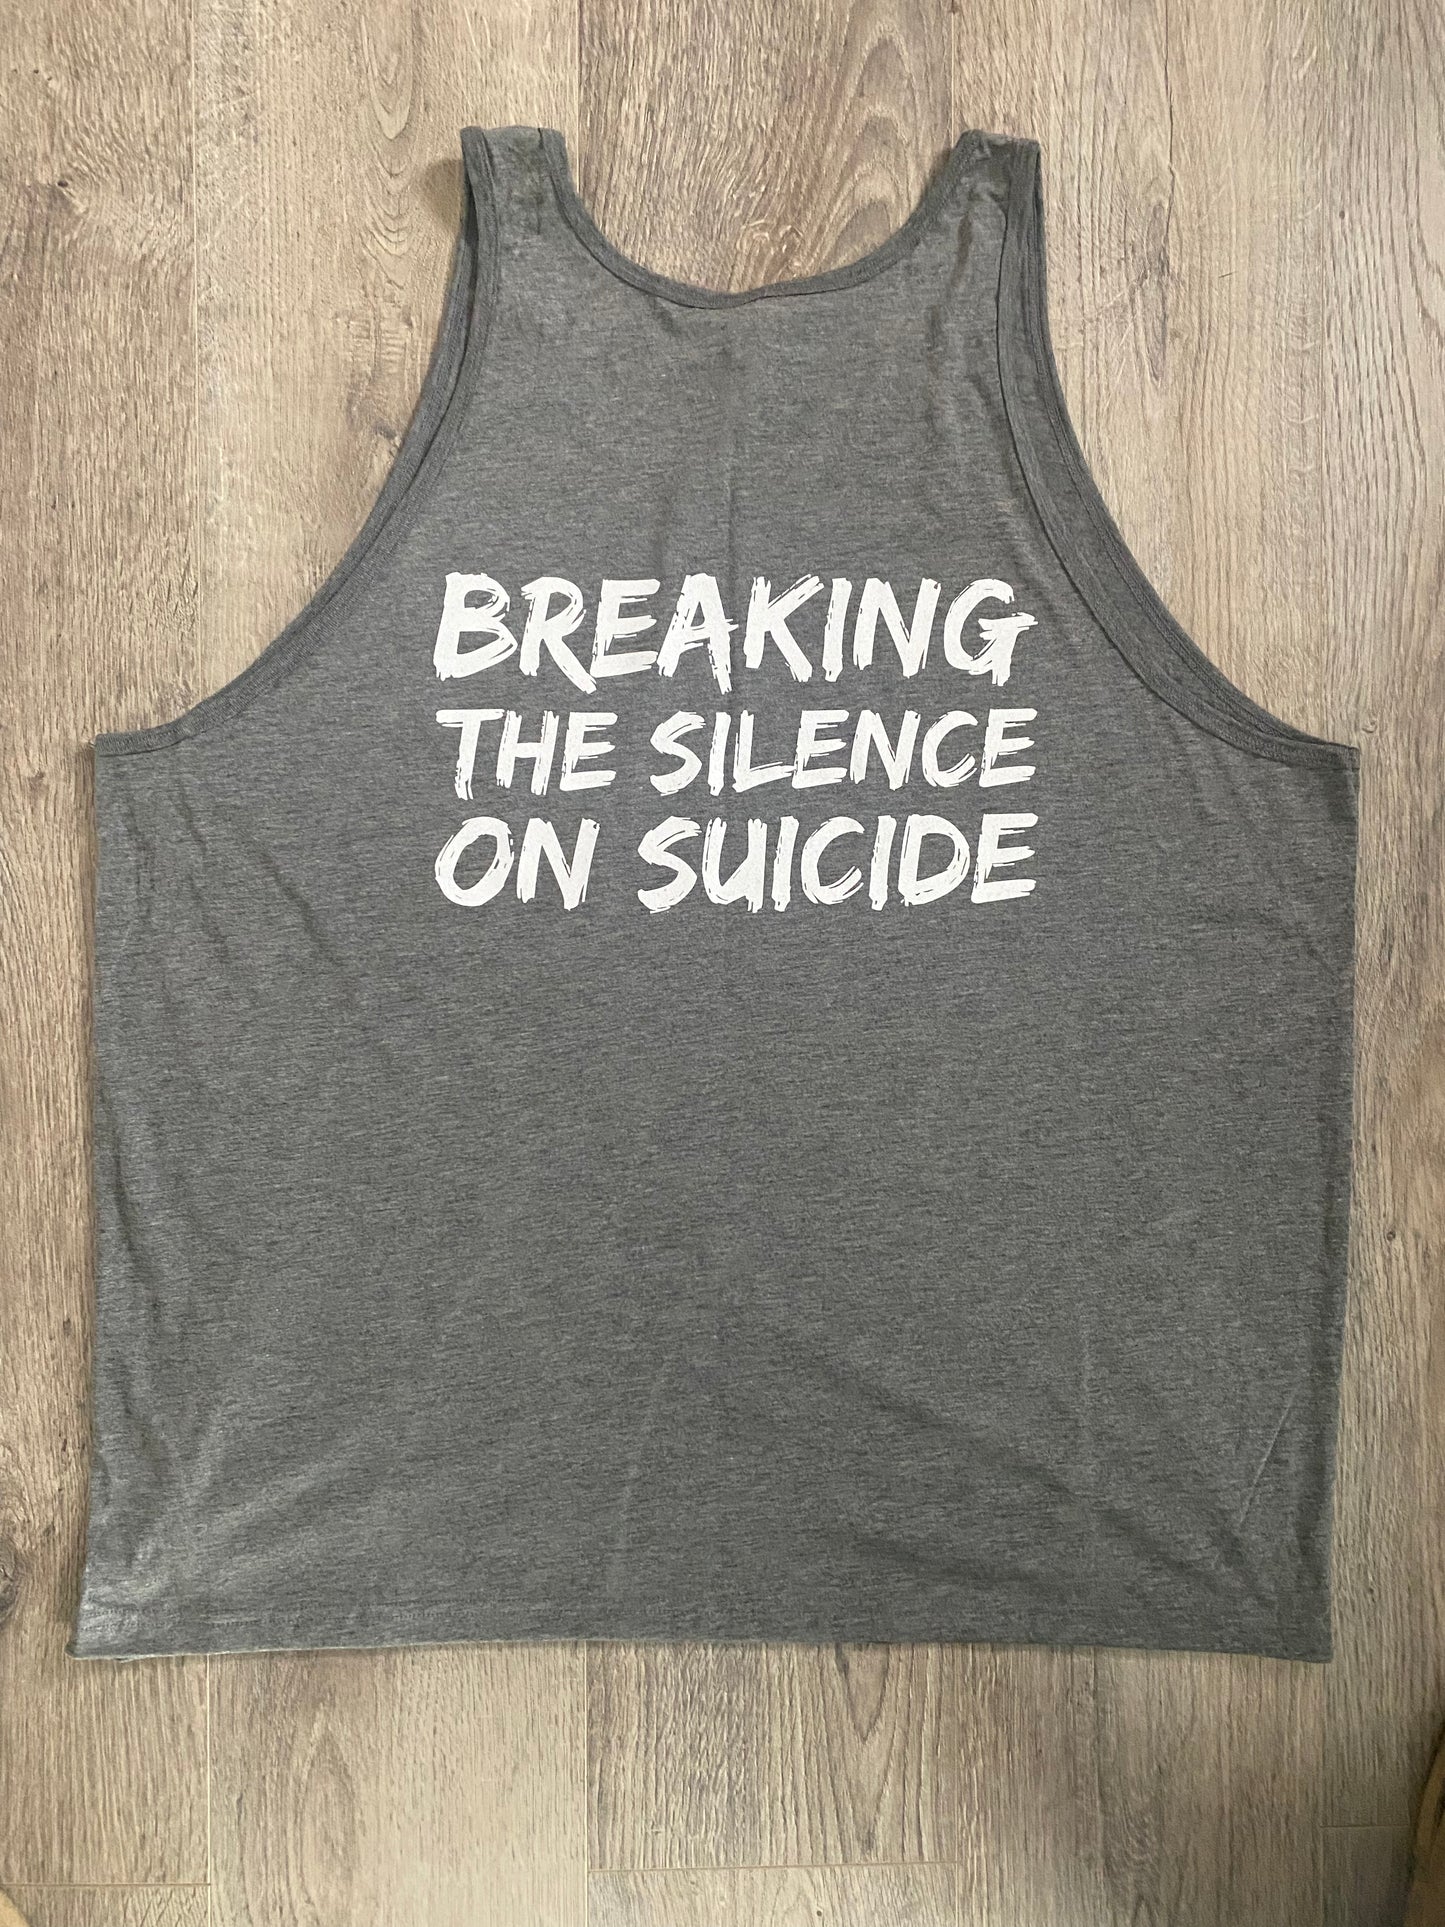 Spring 23’ Breaking the silence Shirt